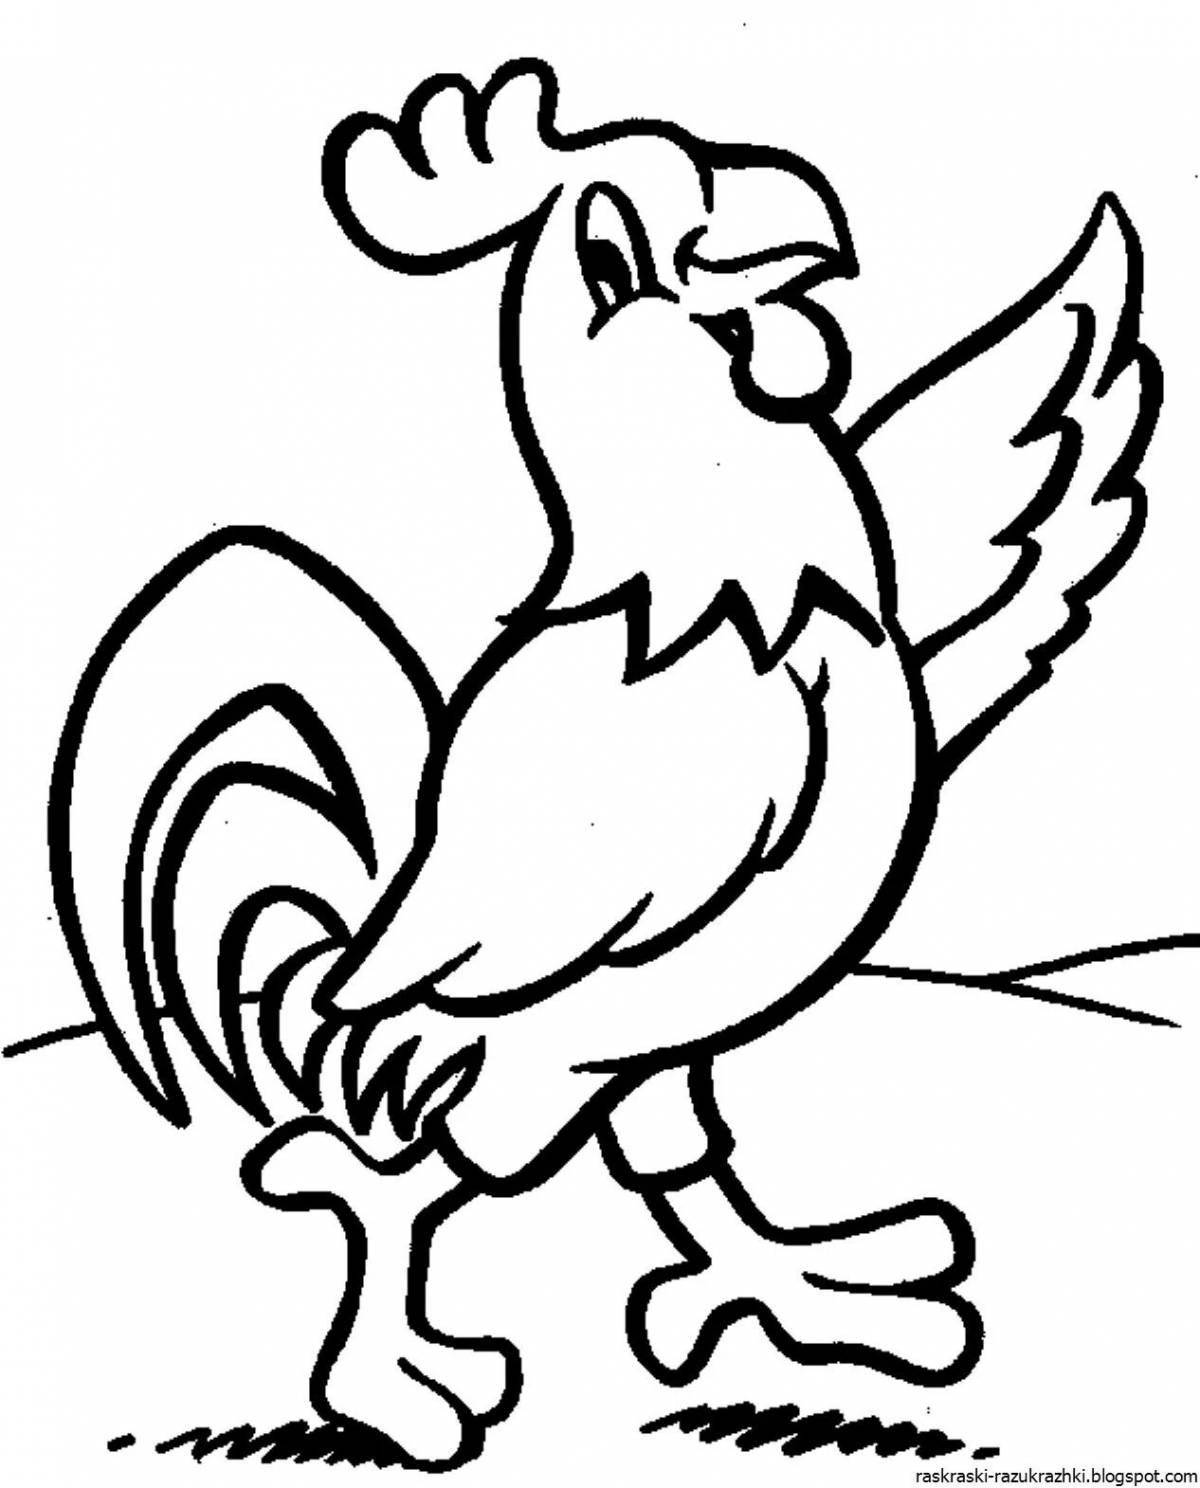 Coloring book joyful rooster for kids